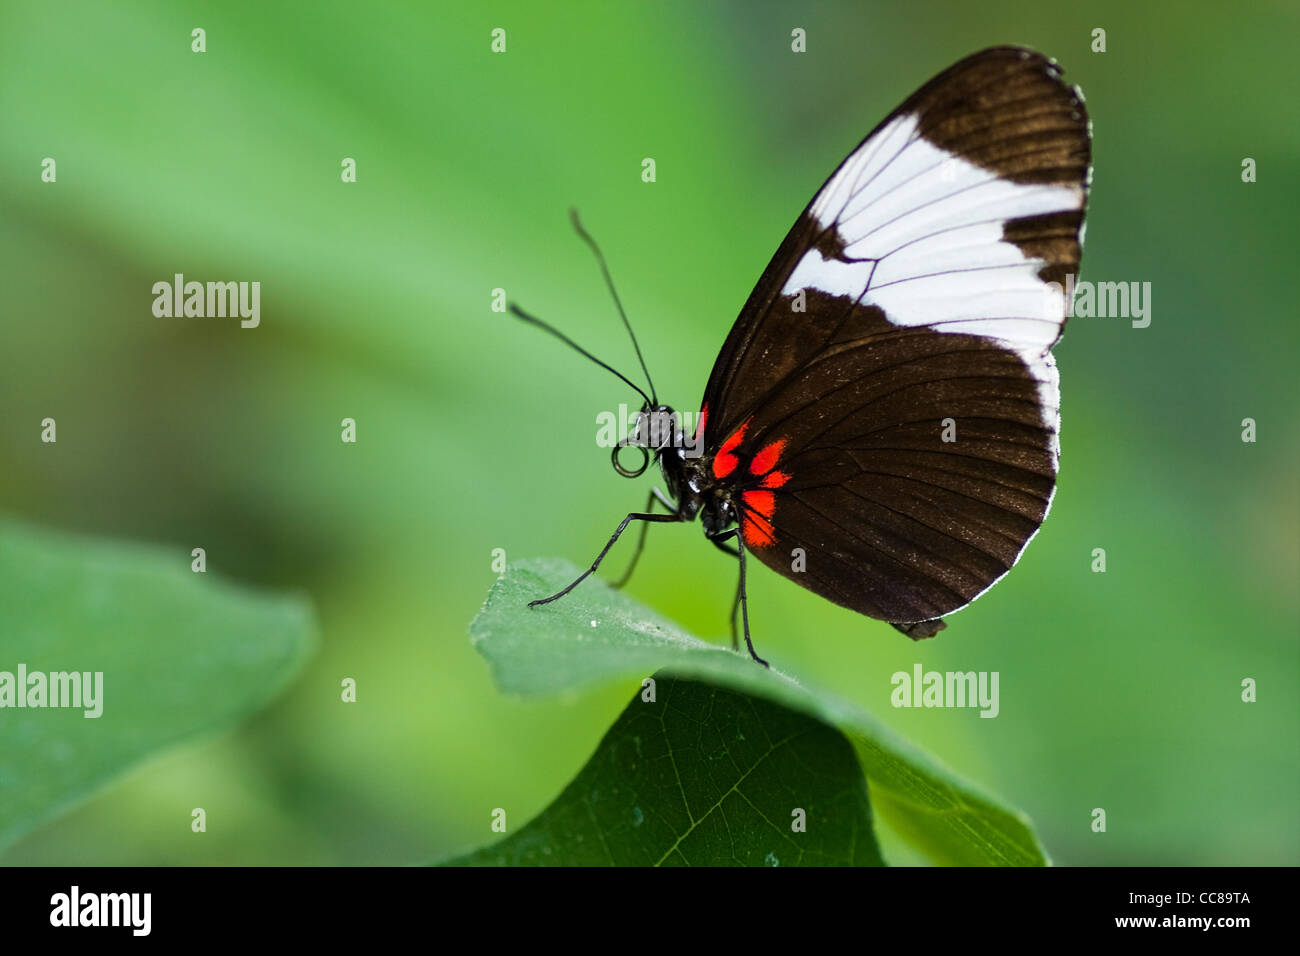 Tropical butterfly Heliconius on green background Stock Photo